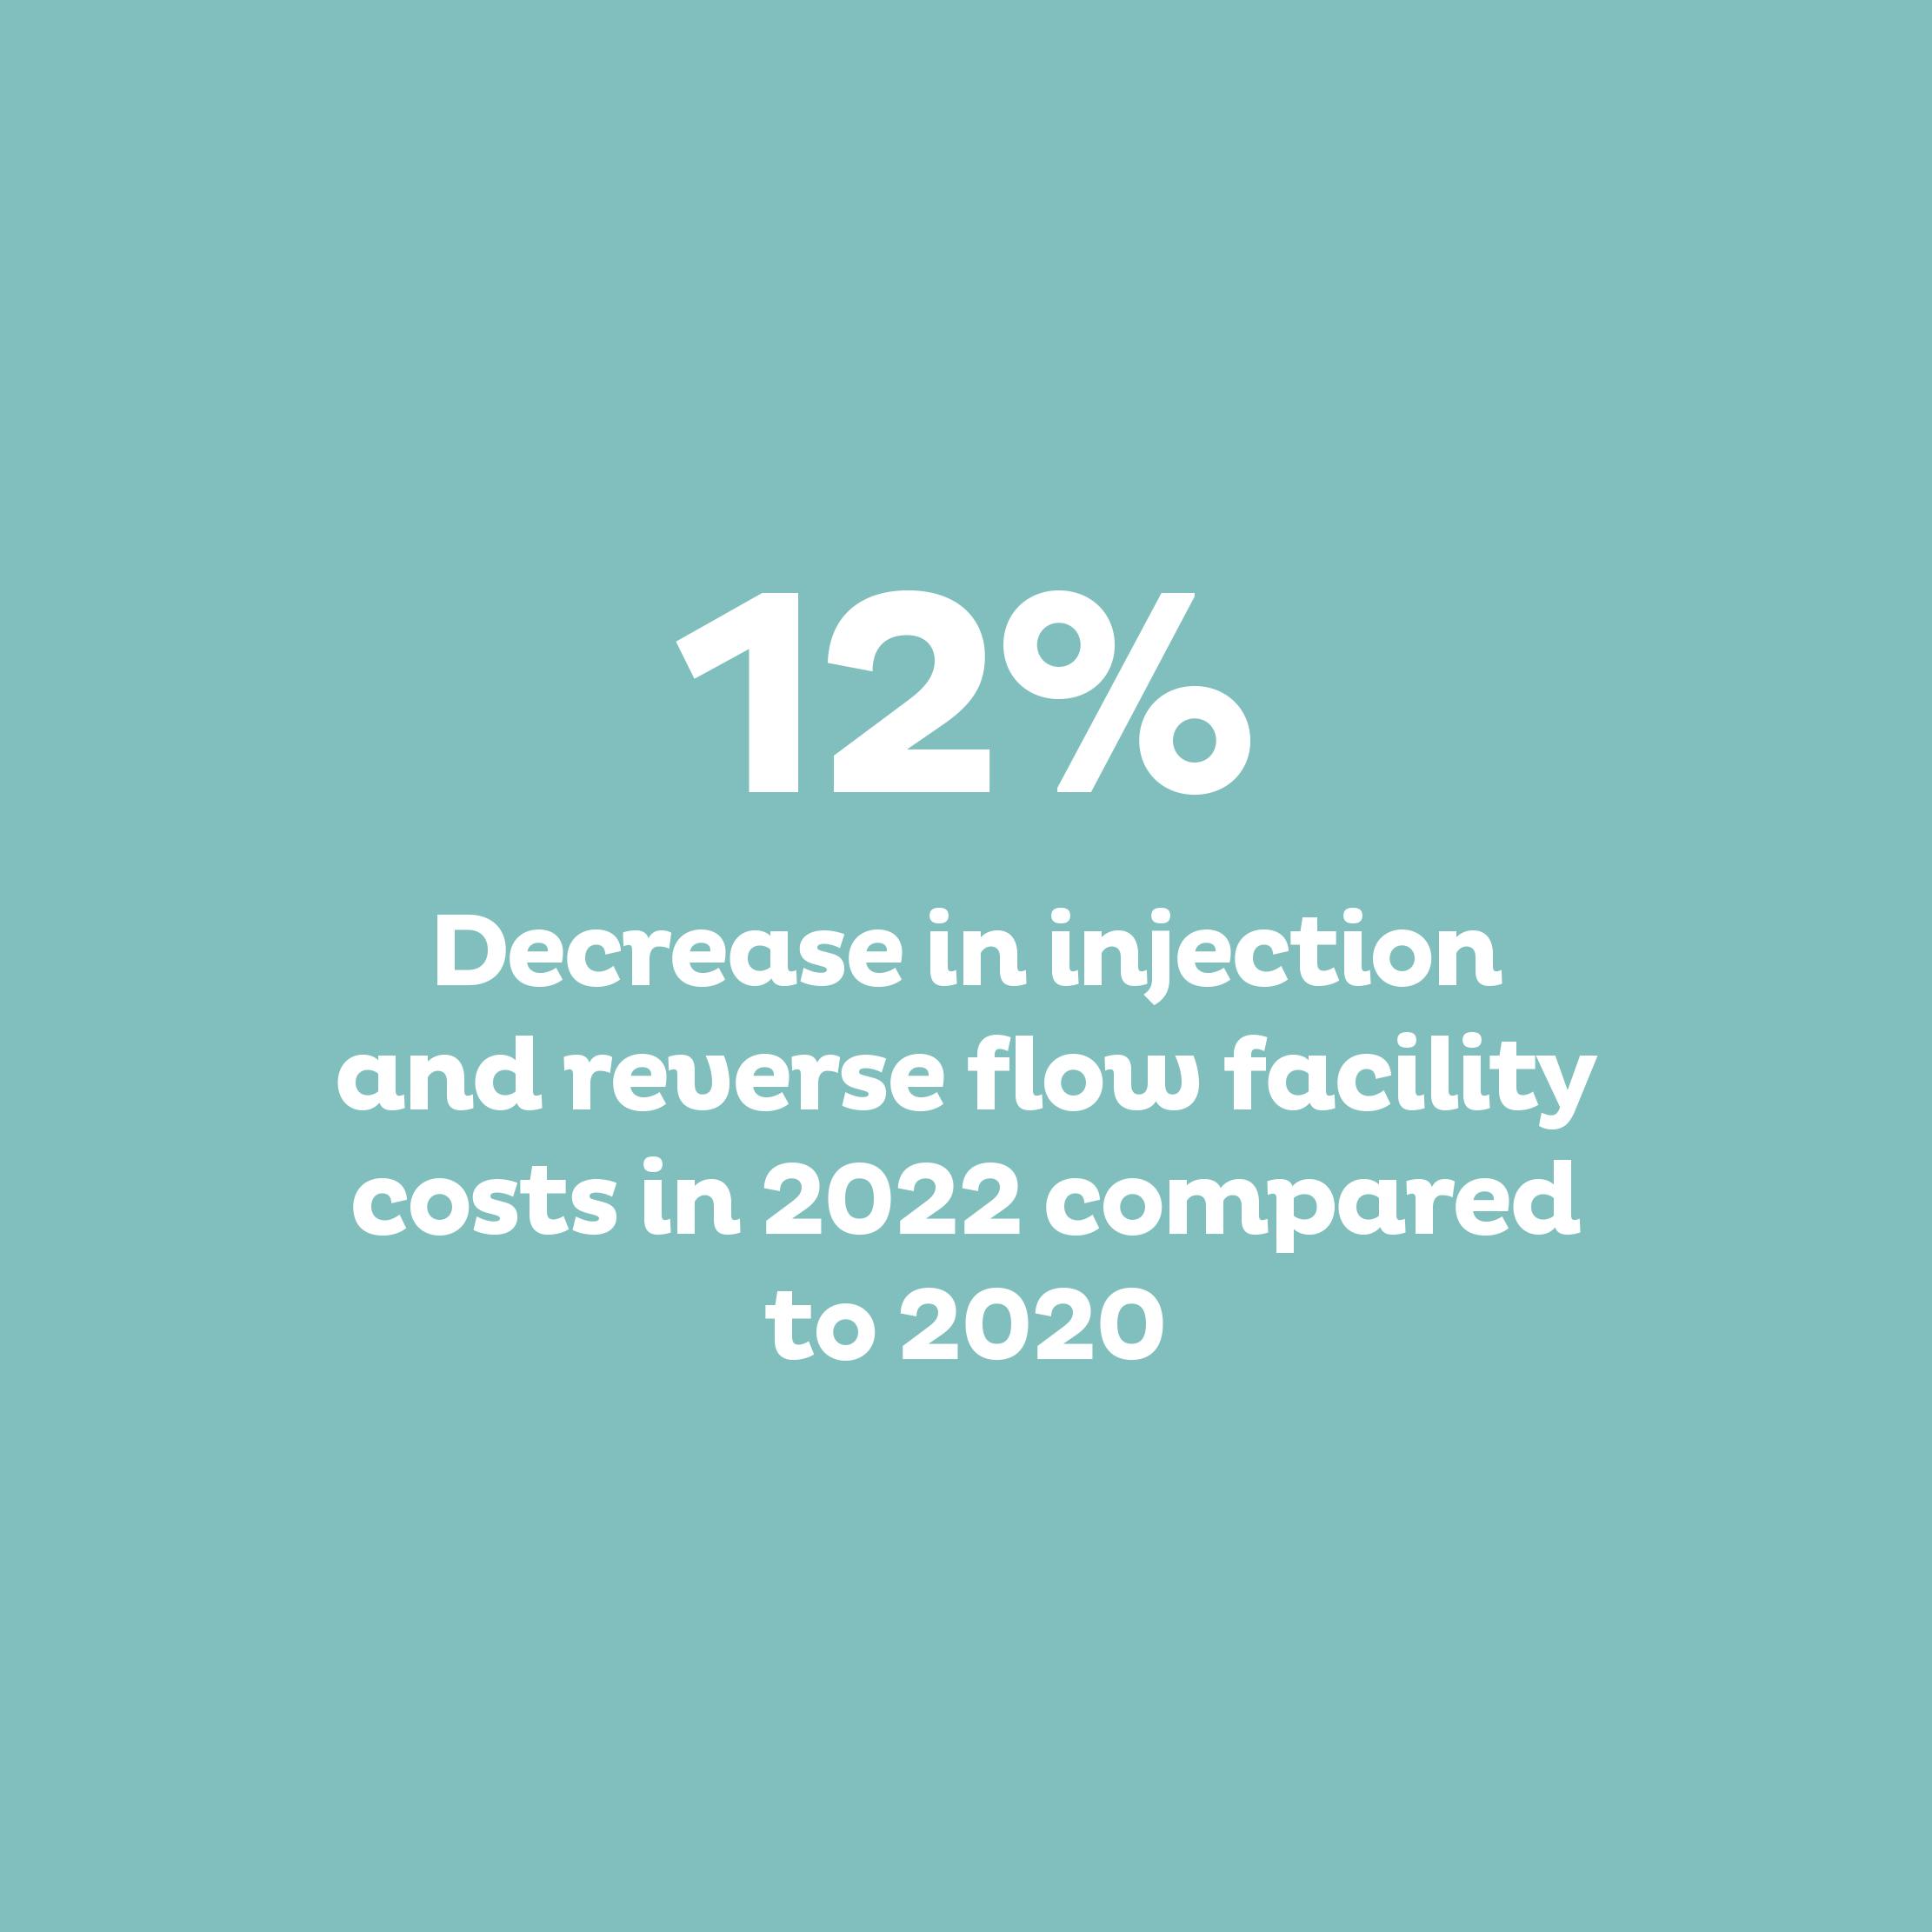 –12% Decrease in injection and reverse flow facility costs in 2022 compared to 2020